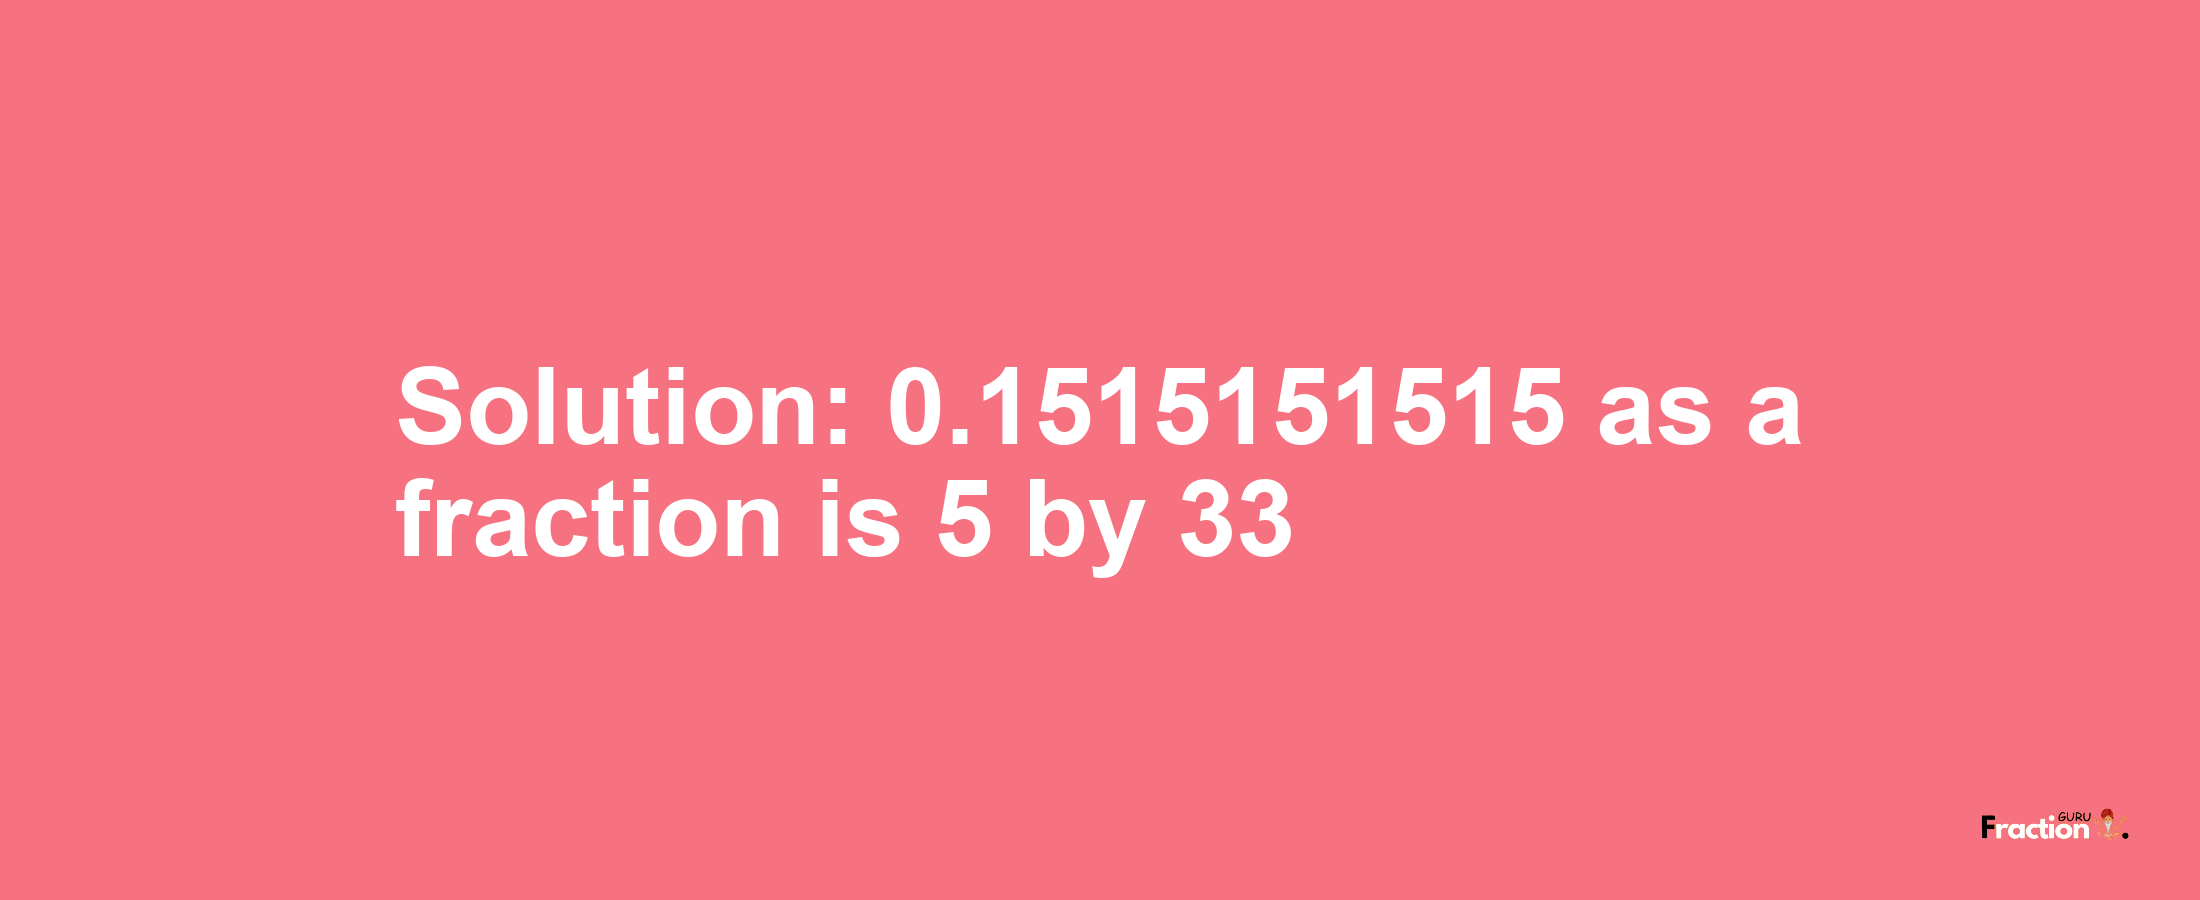 Solution:0.1515151515 as a fraction is 5/33